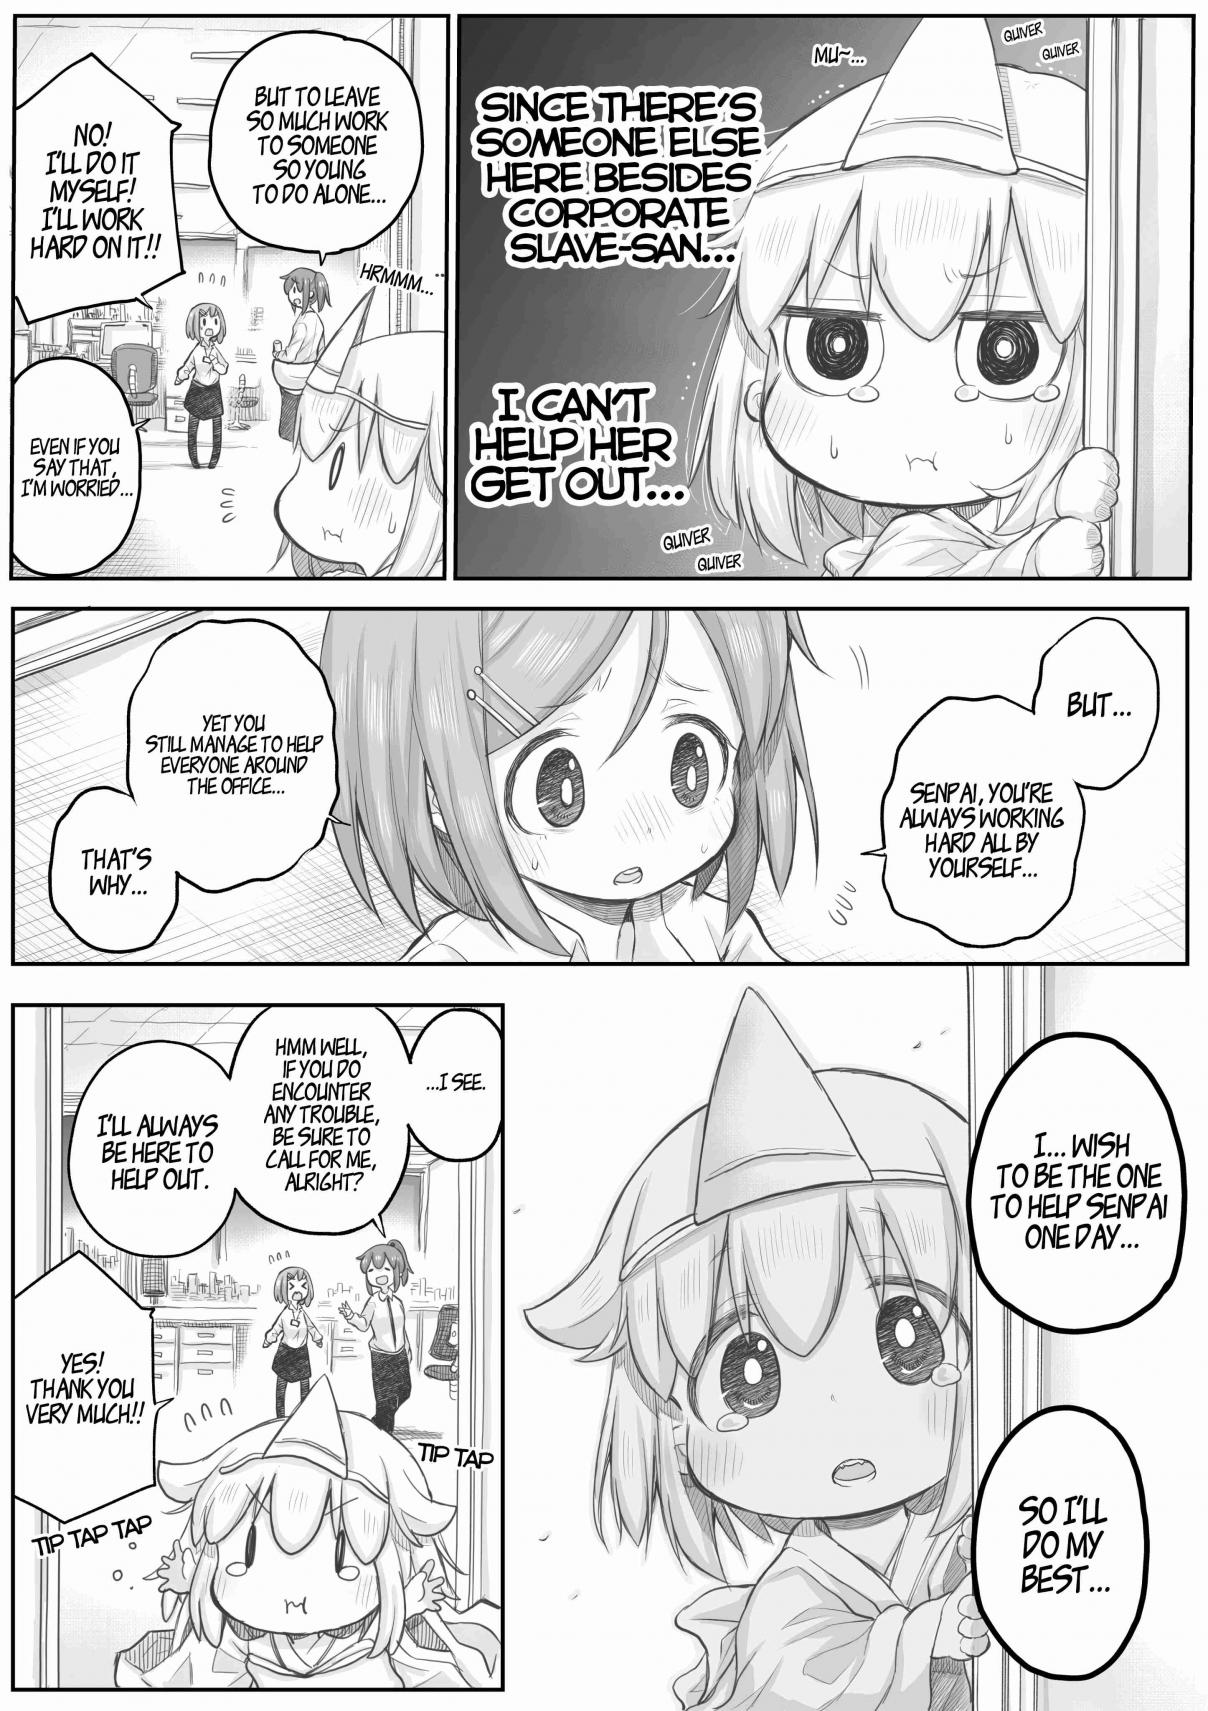 Ms. Corporate Slave Wants to be Healed by a Loli Spirit Vol. 1 Ch. 27